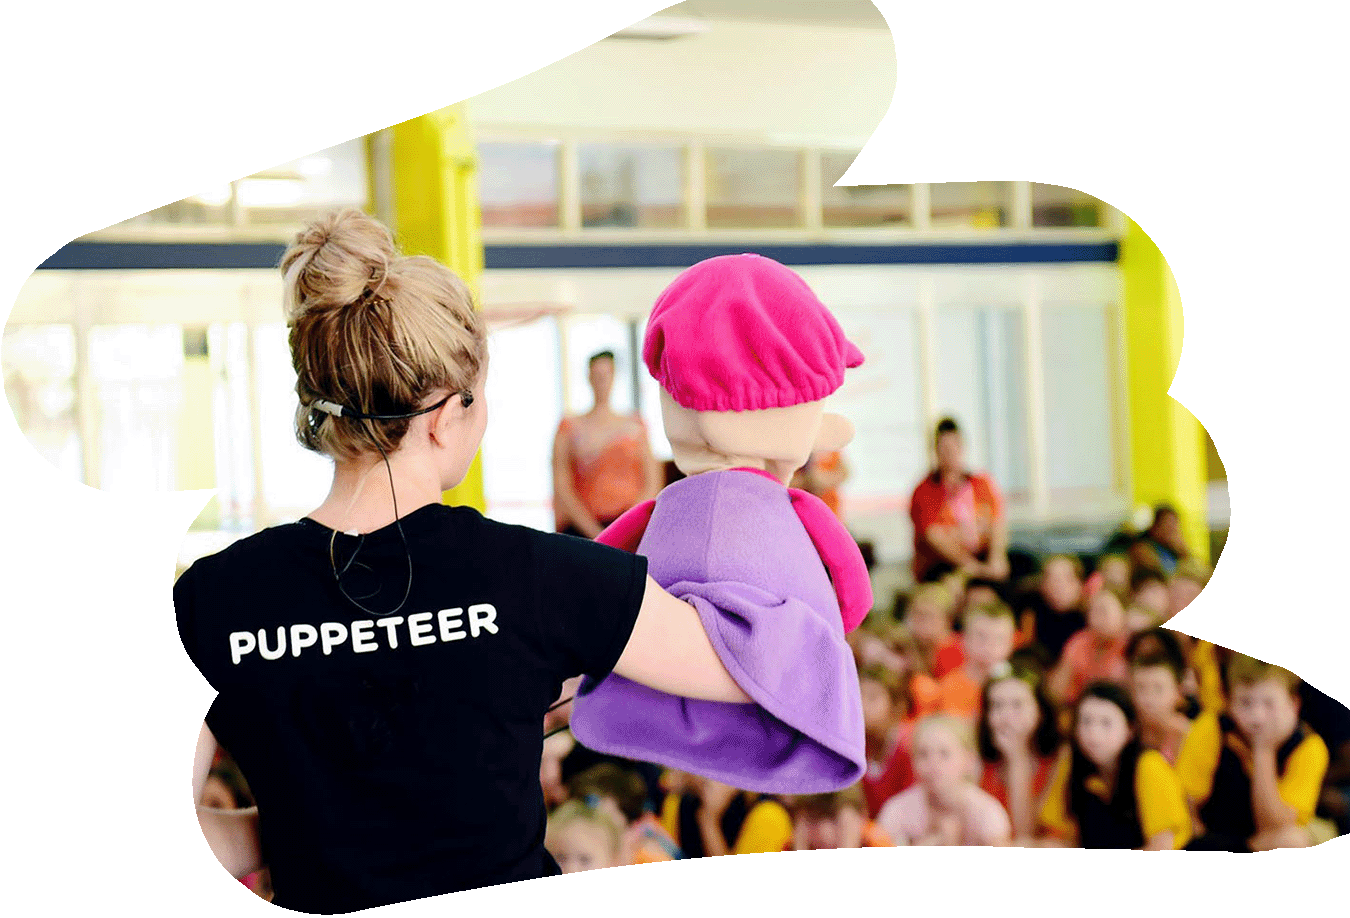 A Camp Quality puppeteer performs a cancer education puppet show at a school